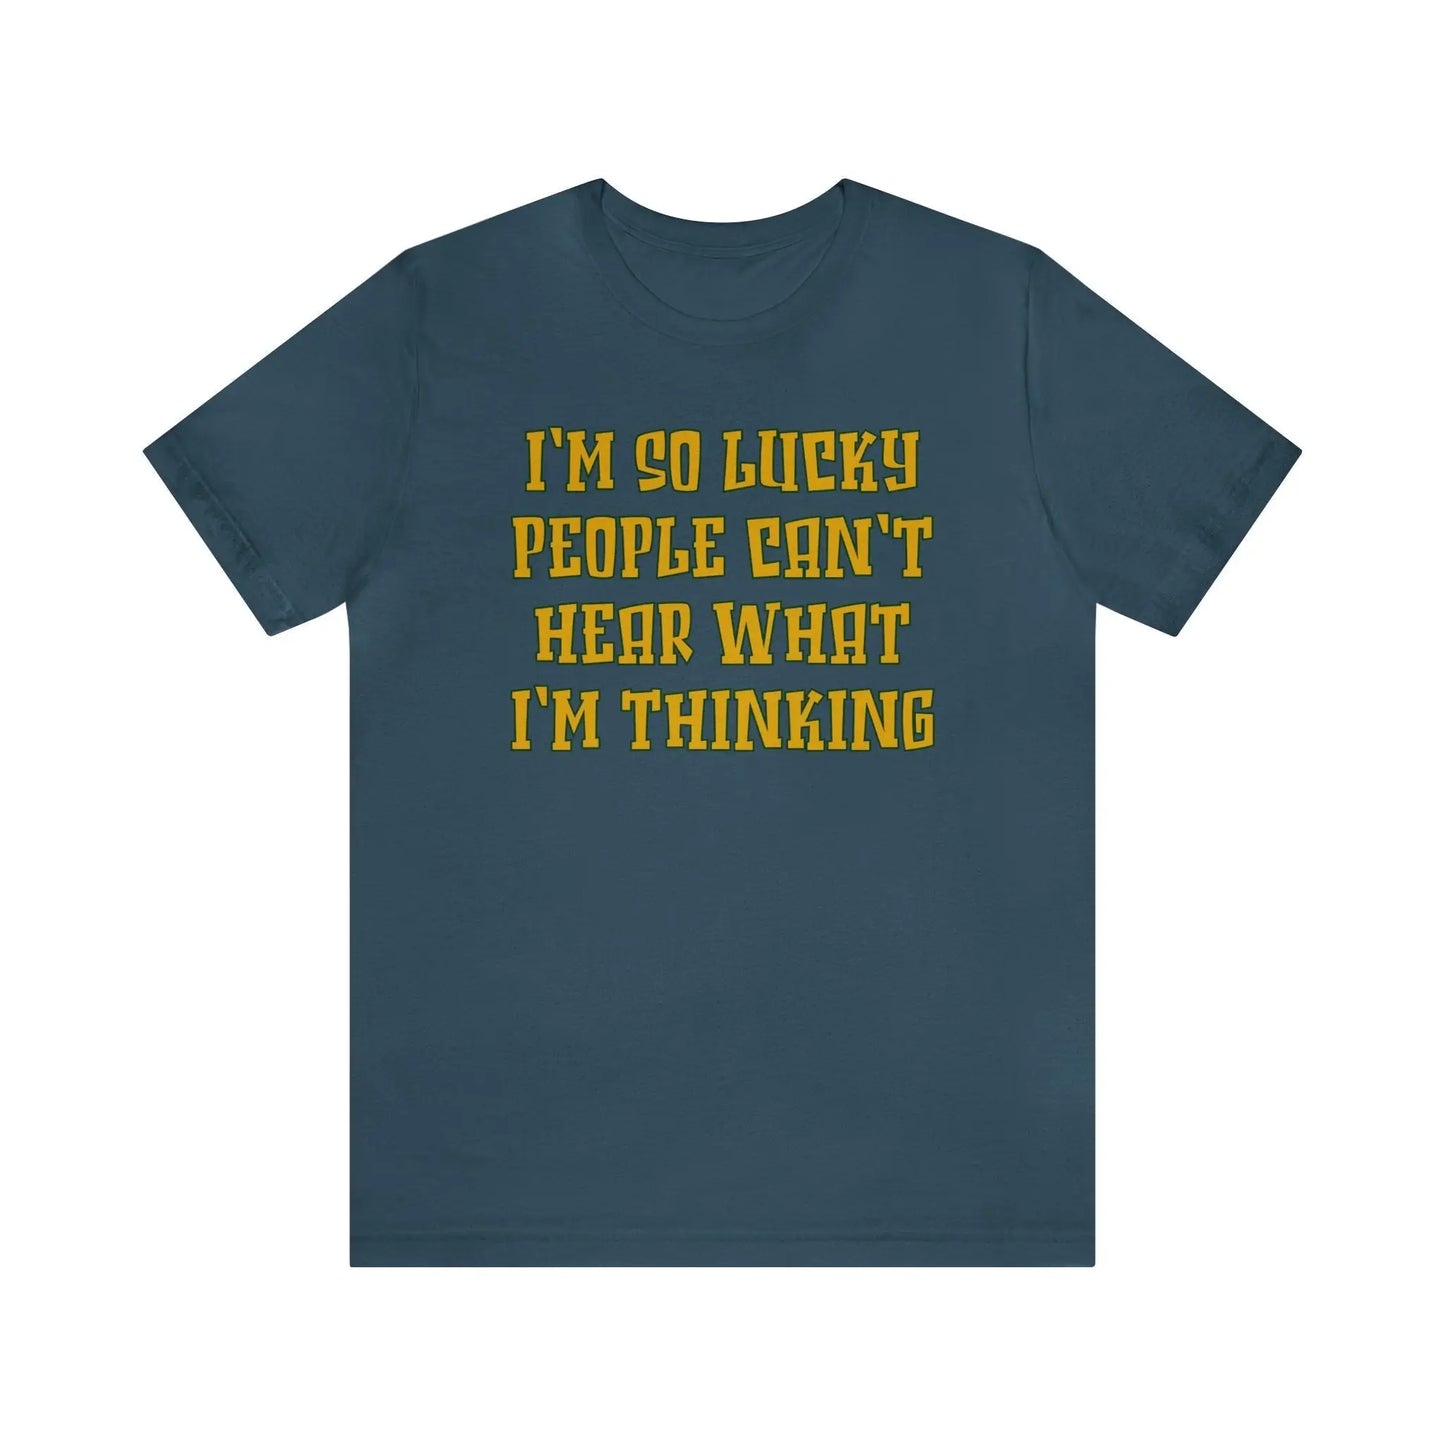 Can't Hear What I'm Thinking Men's Short Sleeve Tee - Wicked Tees